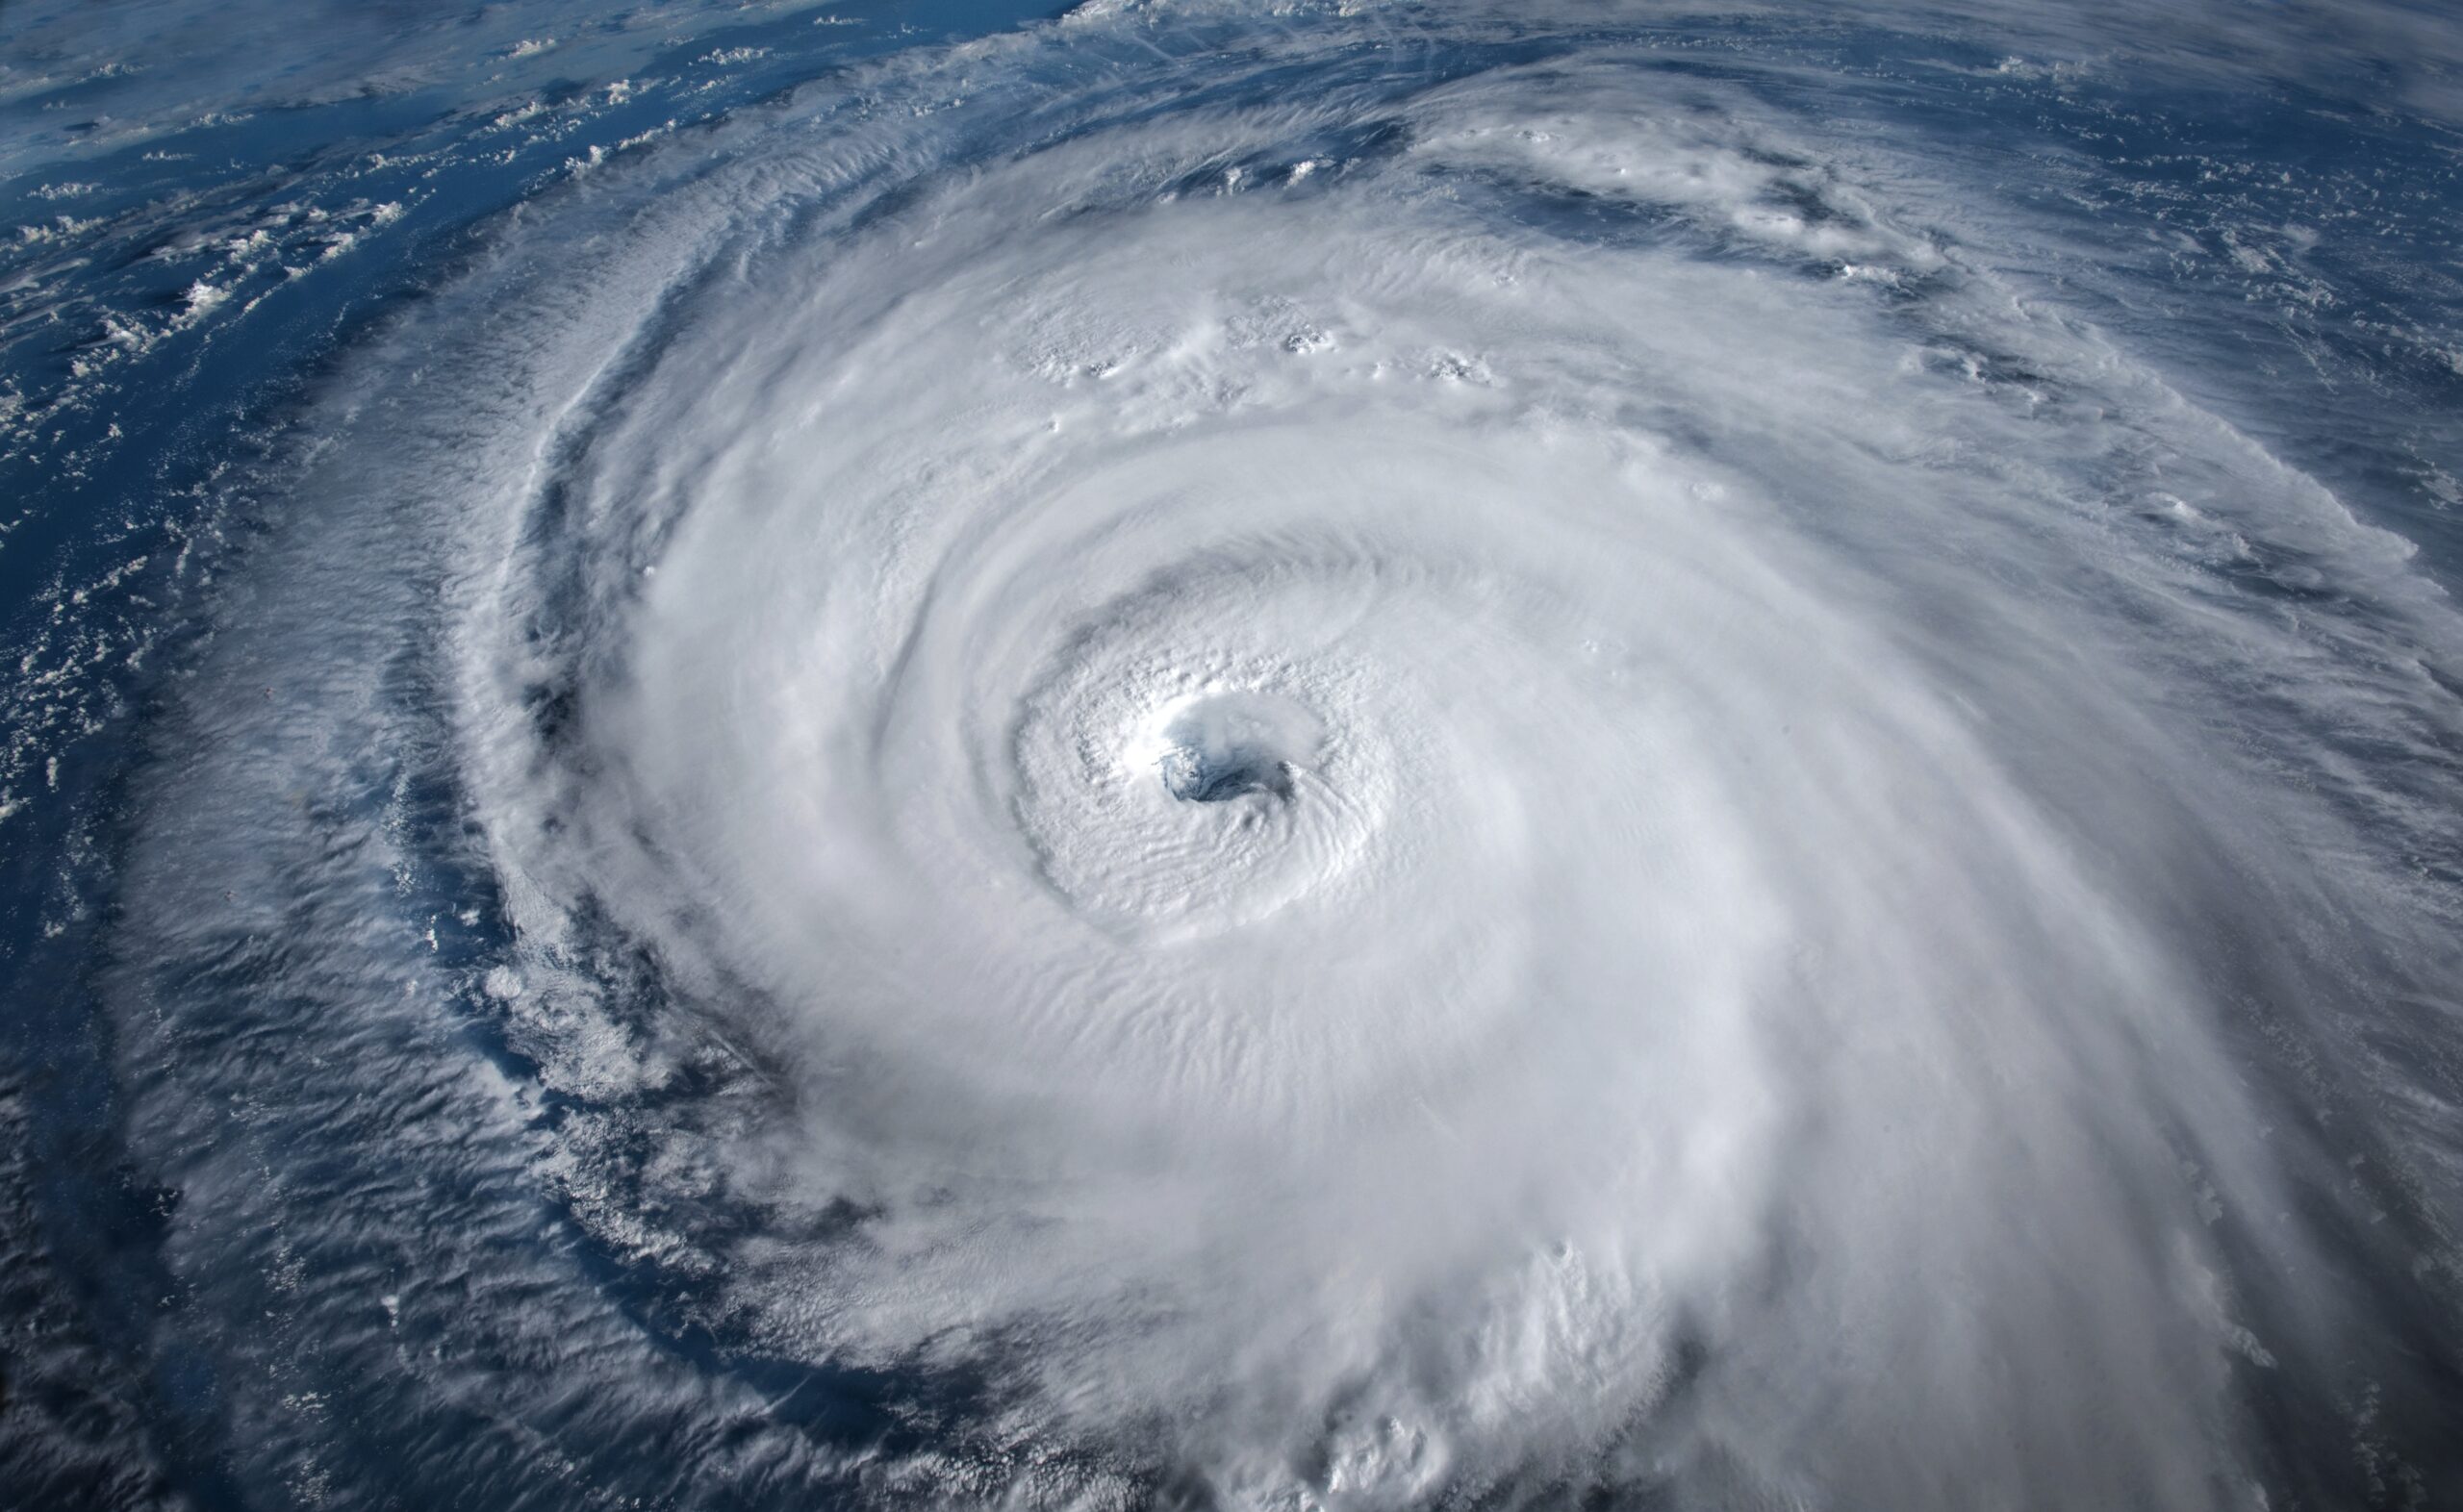 Aerial view of a massive hurricane with a well-defined eye, swirling clouds, and extending spiral arms over the ocean.